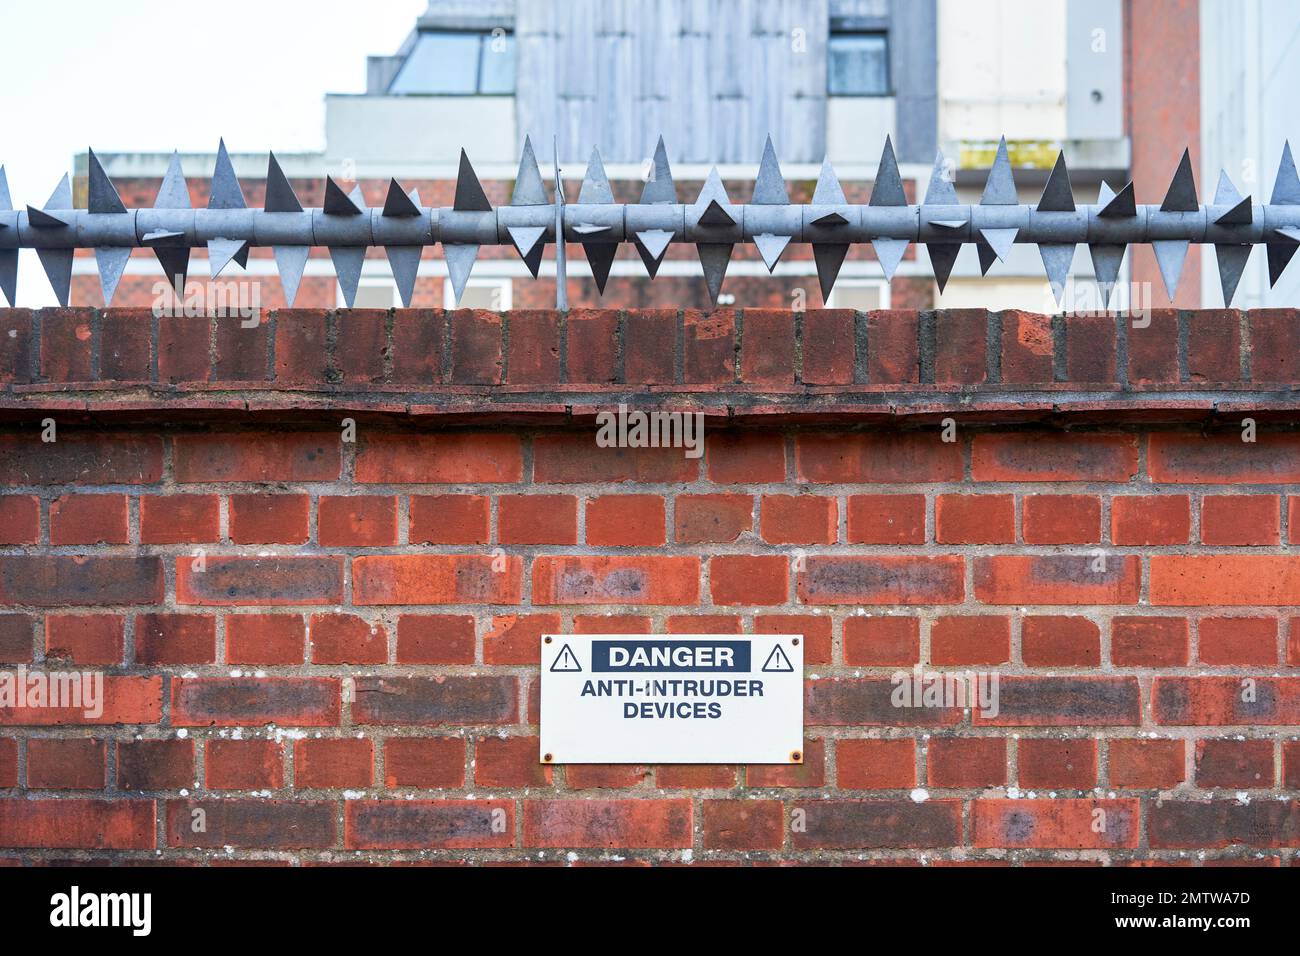 Red brick wall with rotating spike anti intruder device and warning sign Stock Photo